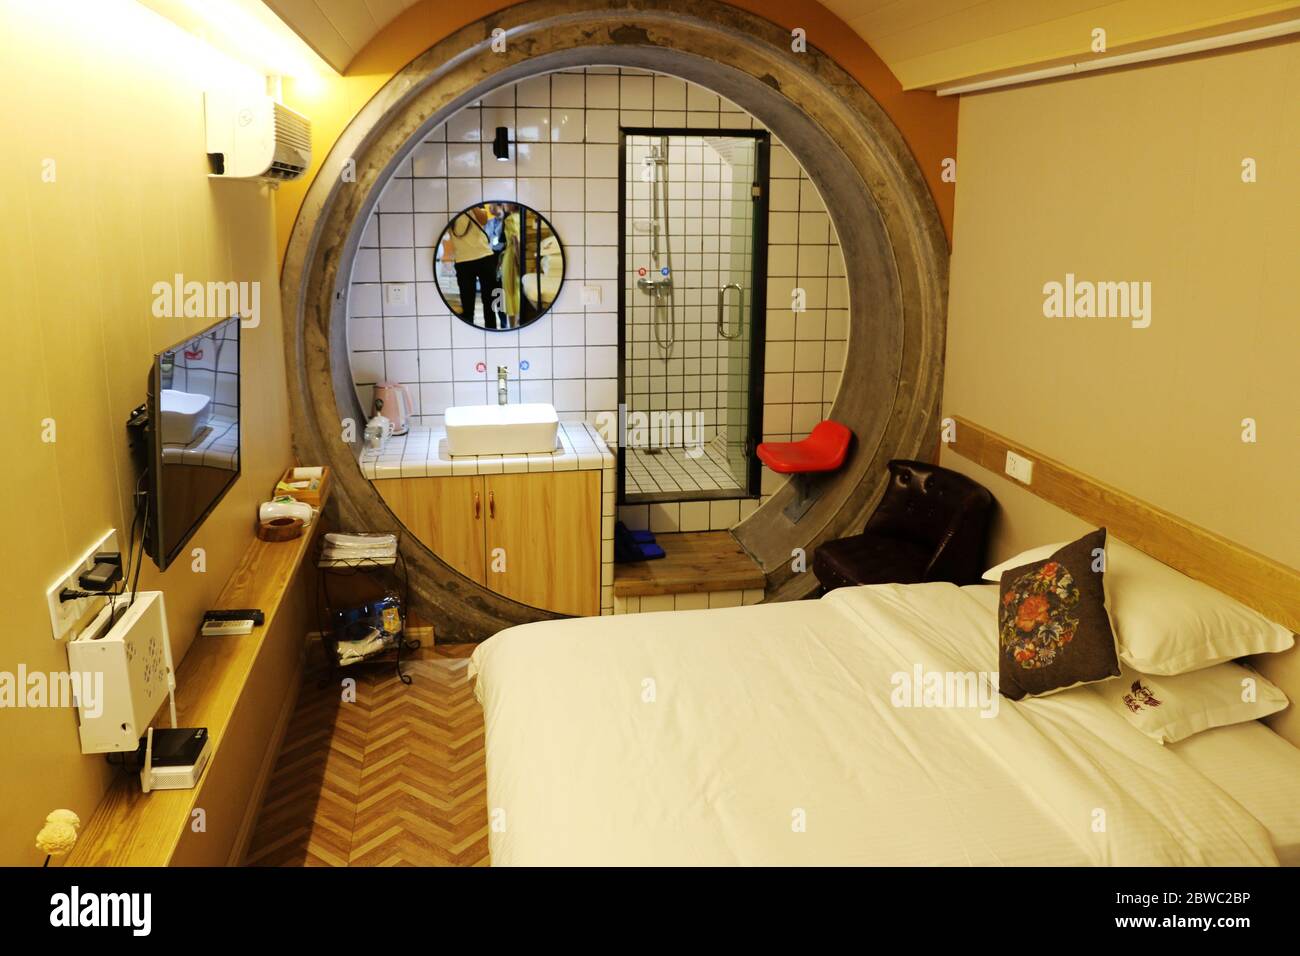 May 31, 2020, Chongqing, Chongqing, China: SichuanÃ¯Â¼Å'CHINA-A row of cement pipes creates a unique home stay facility resembling a ''hobbit village'' in chongqing, China, on May 23, 2020. The home is inspired by the hobbit village in the Lord of the rings, where ''homeless people often live in sewers that provide shelter from the rain and wind. The site saw that the indoor pipe b&b is about 2.4 meters in diameter and 4 meters in length. Each cement tube is equipped with a bed for up to 3 people to rest. Although the internal space is not wide, it can be said that everything is available. If Stock Photo